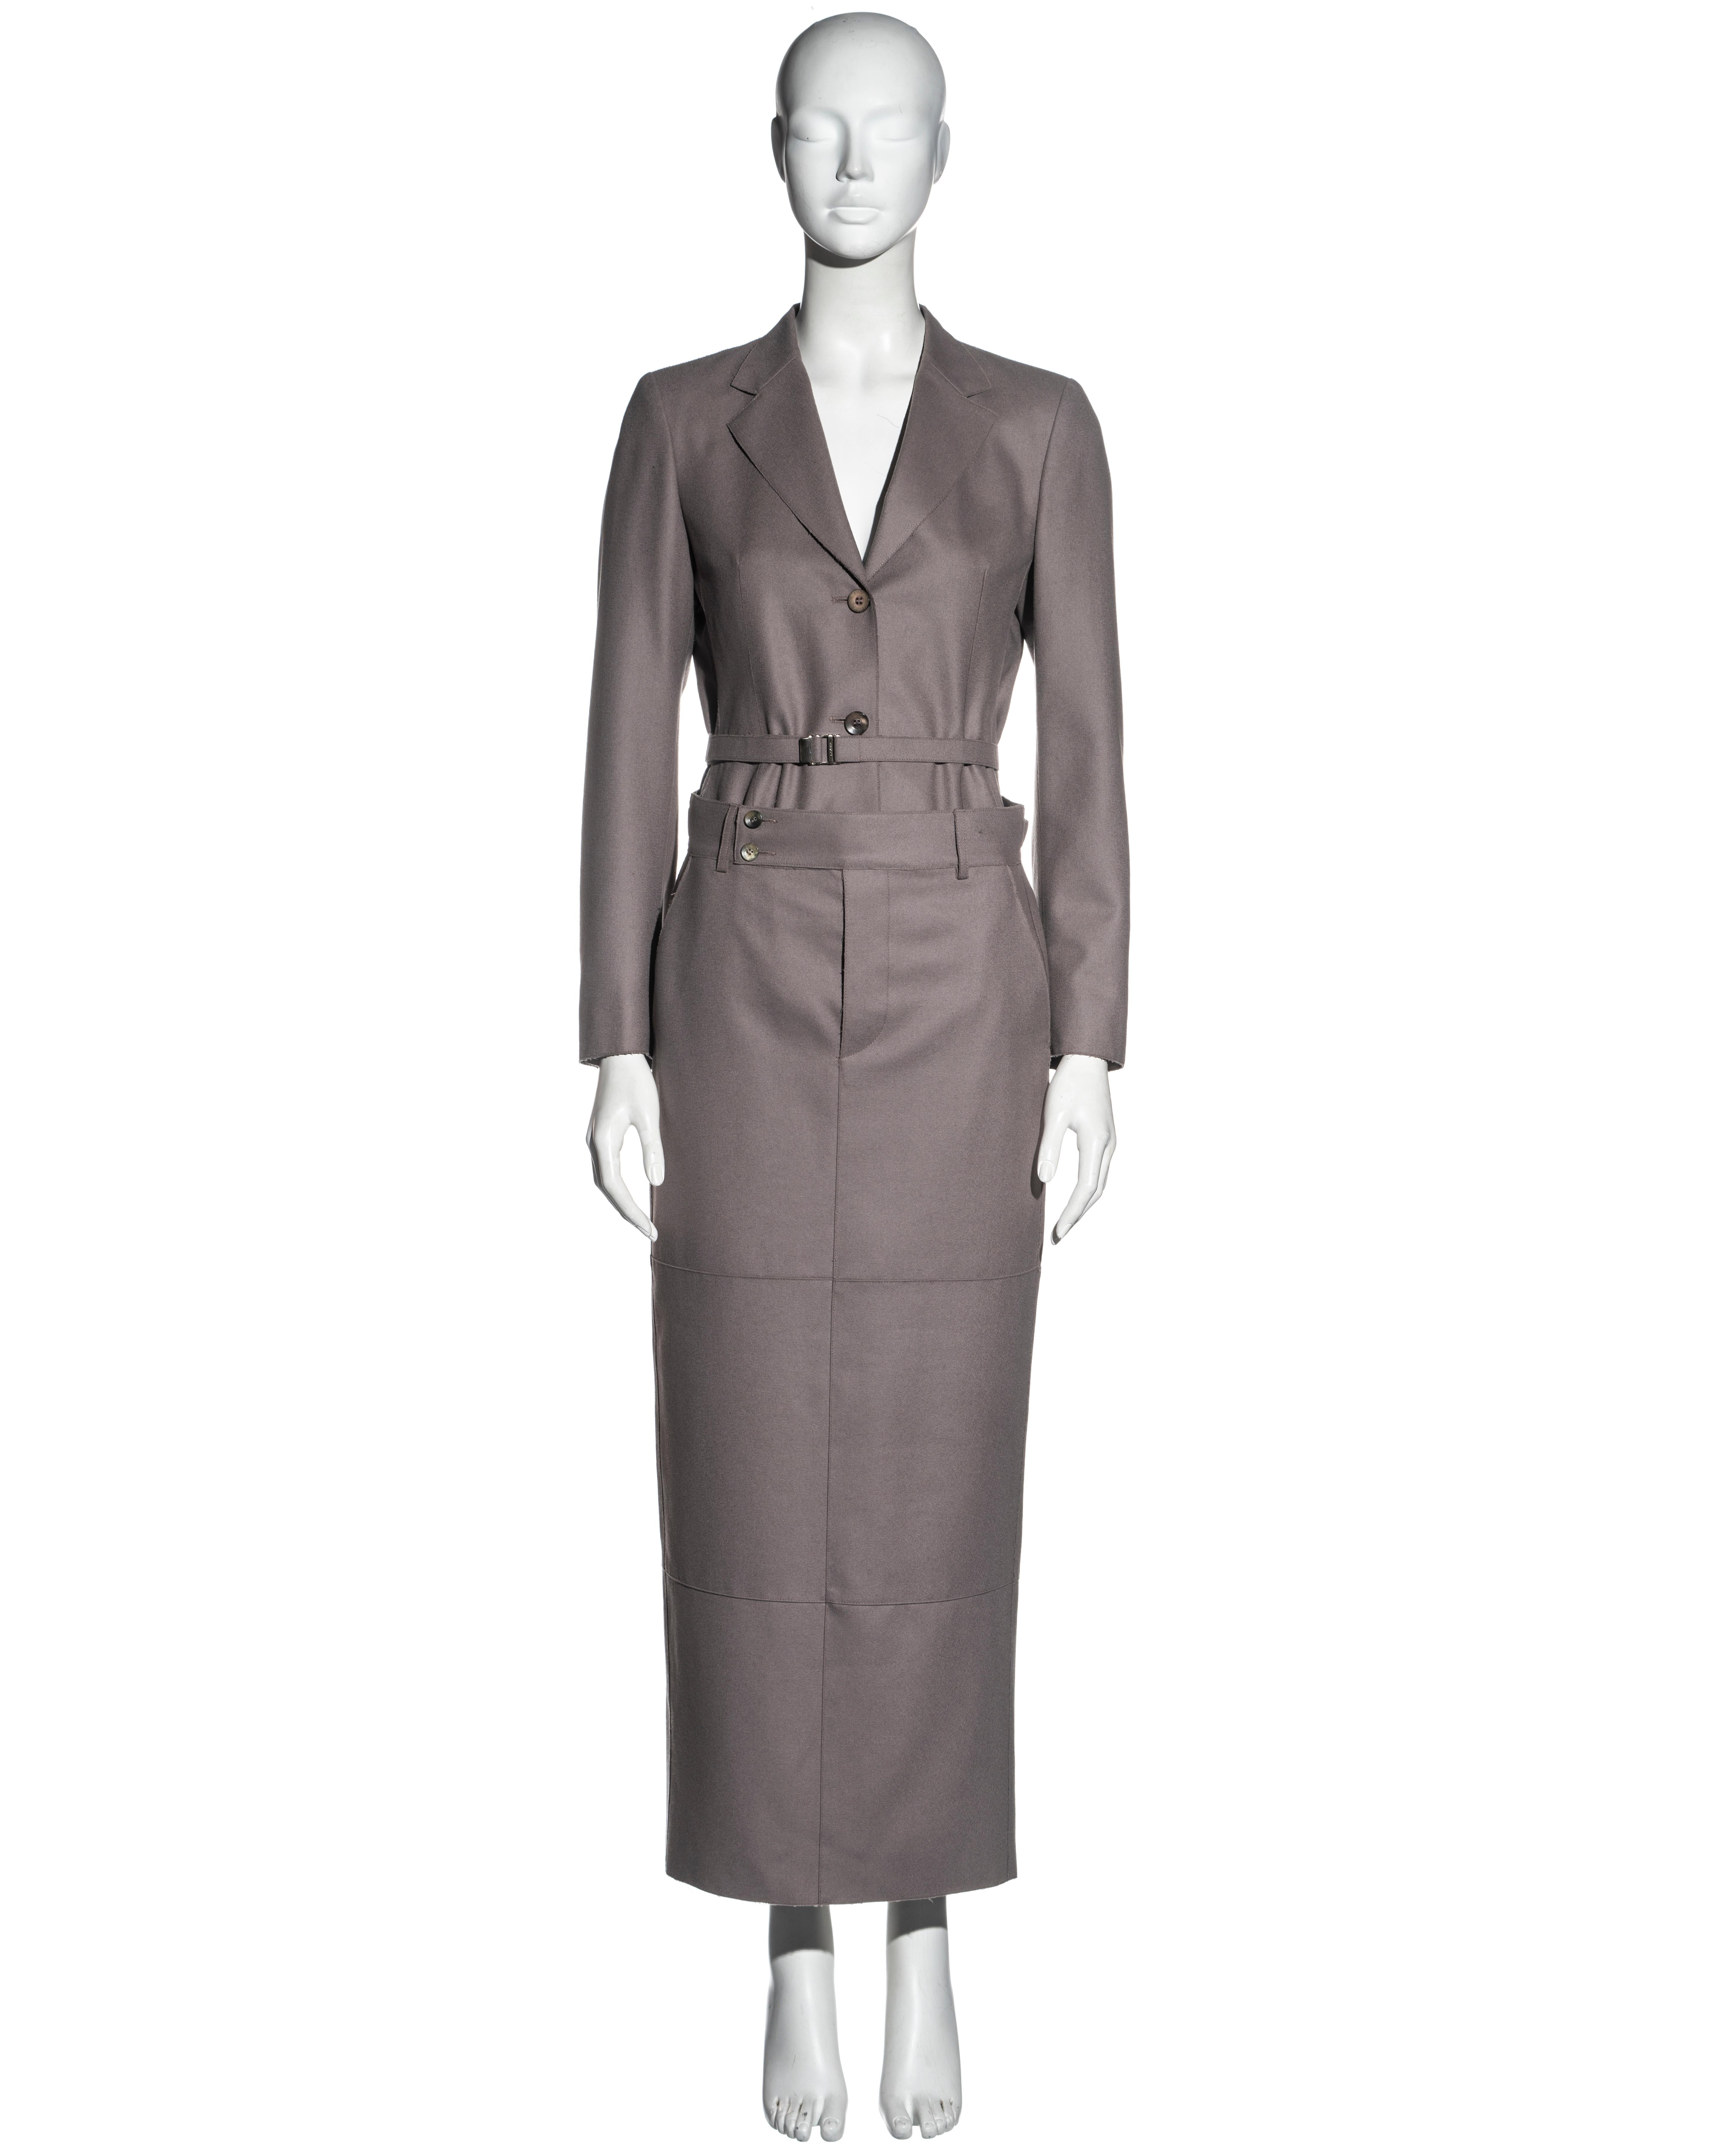 ▪ Gucci taupe wool felt skirt suit 
▪ Designed by Tom Ford
▪ Single-breasted jacket with matching belt
▪ Ankle-length skirt with two back flap pockets
▪ Mother-of-Pearl buttons 
▪ Top stitch seams 
▪ Knee-high slit
▪ IT 40 - FR 36 - UK 8 - US 4
▪